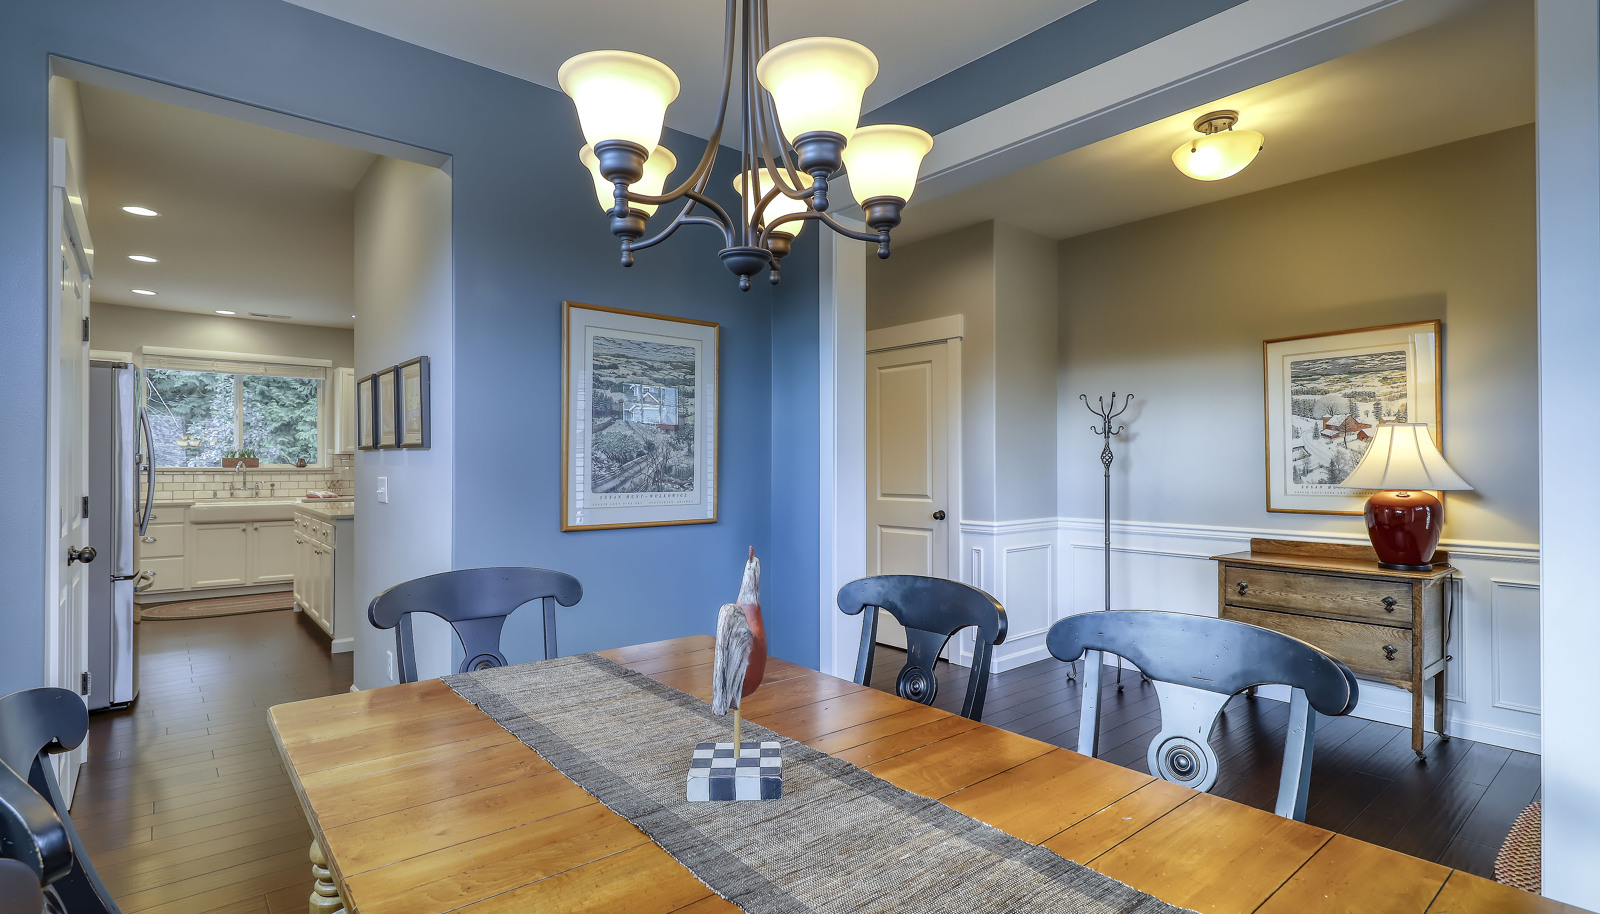 Formal dining room with easy access to the Chef's gourmet updated kitchen!